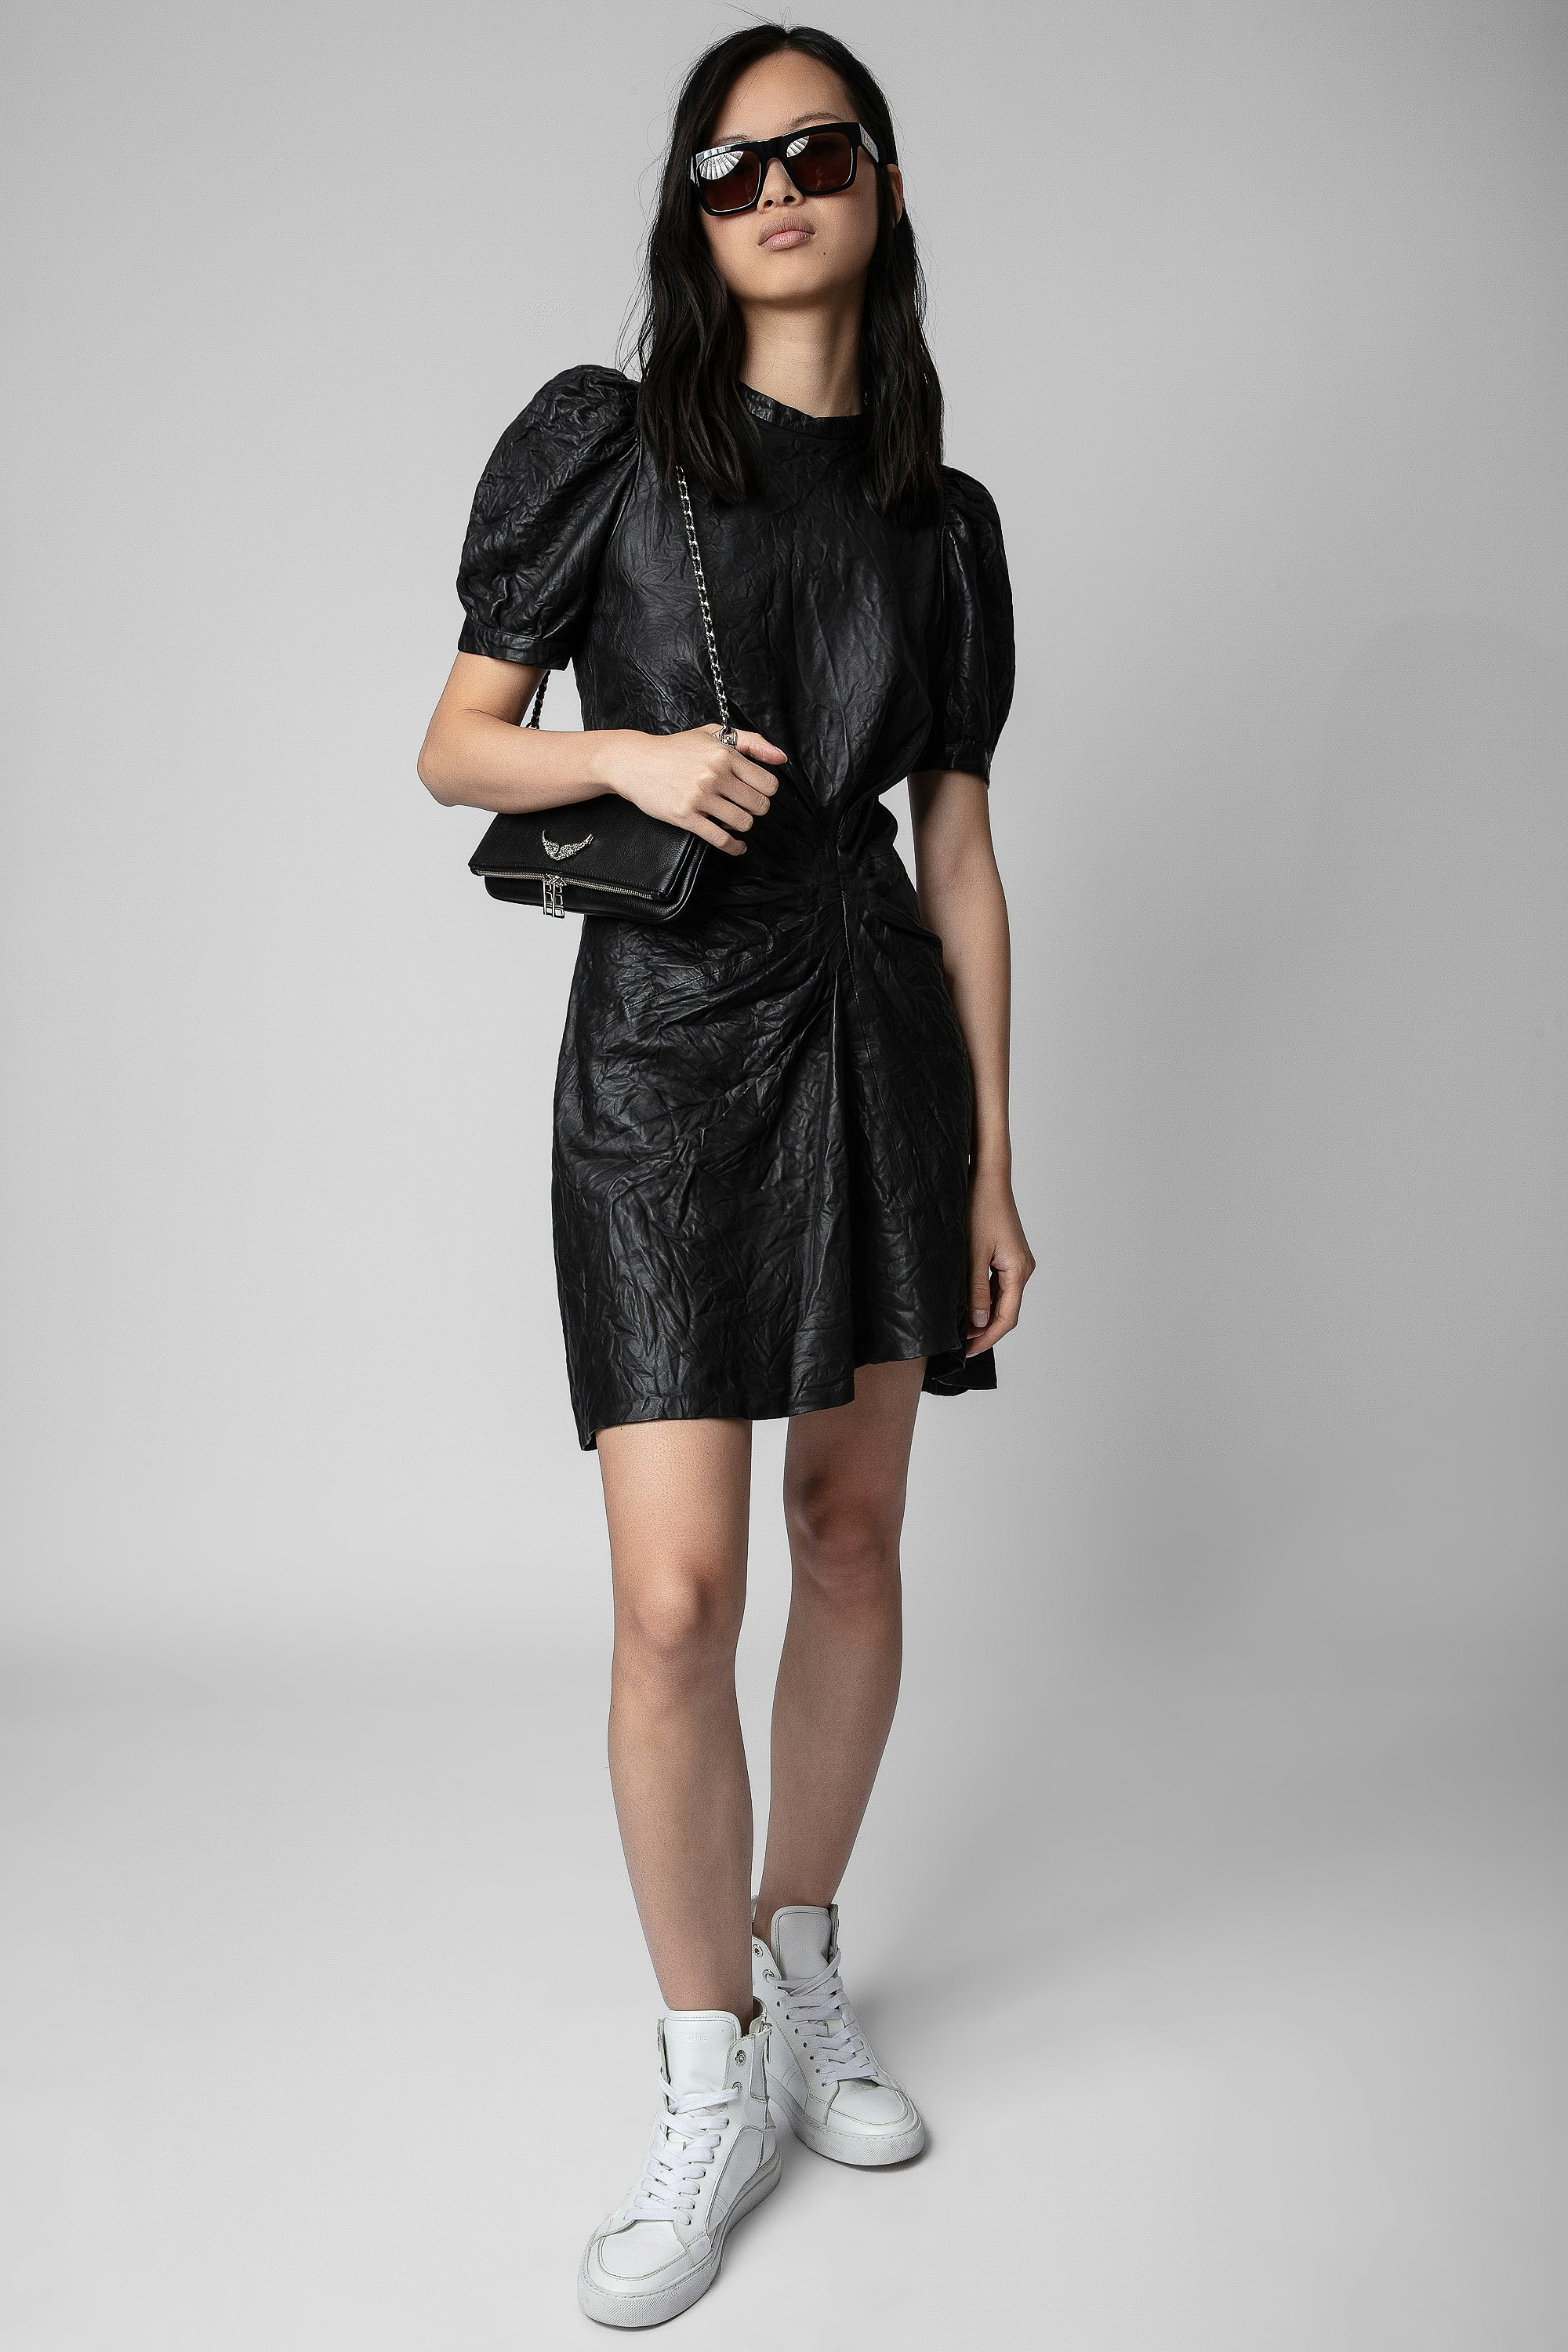 Rixe Creased Leather Dress - Women’s creased leather dress with short balloon sleeves